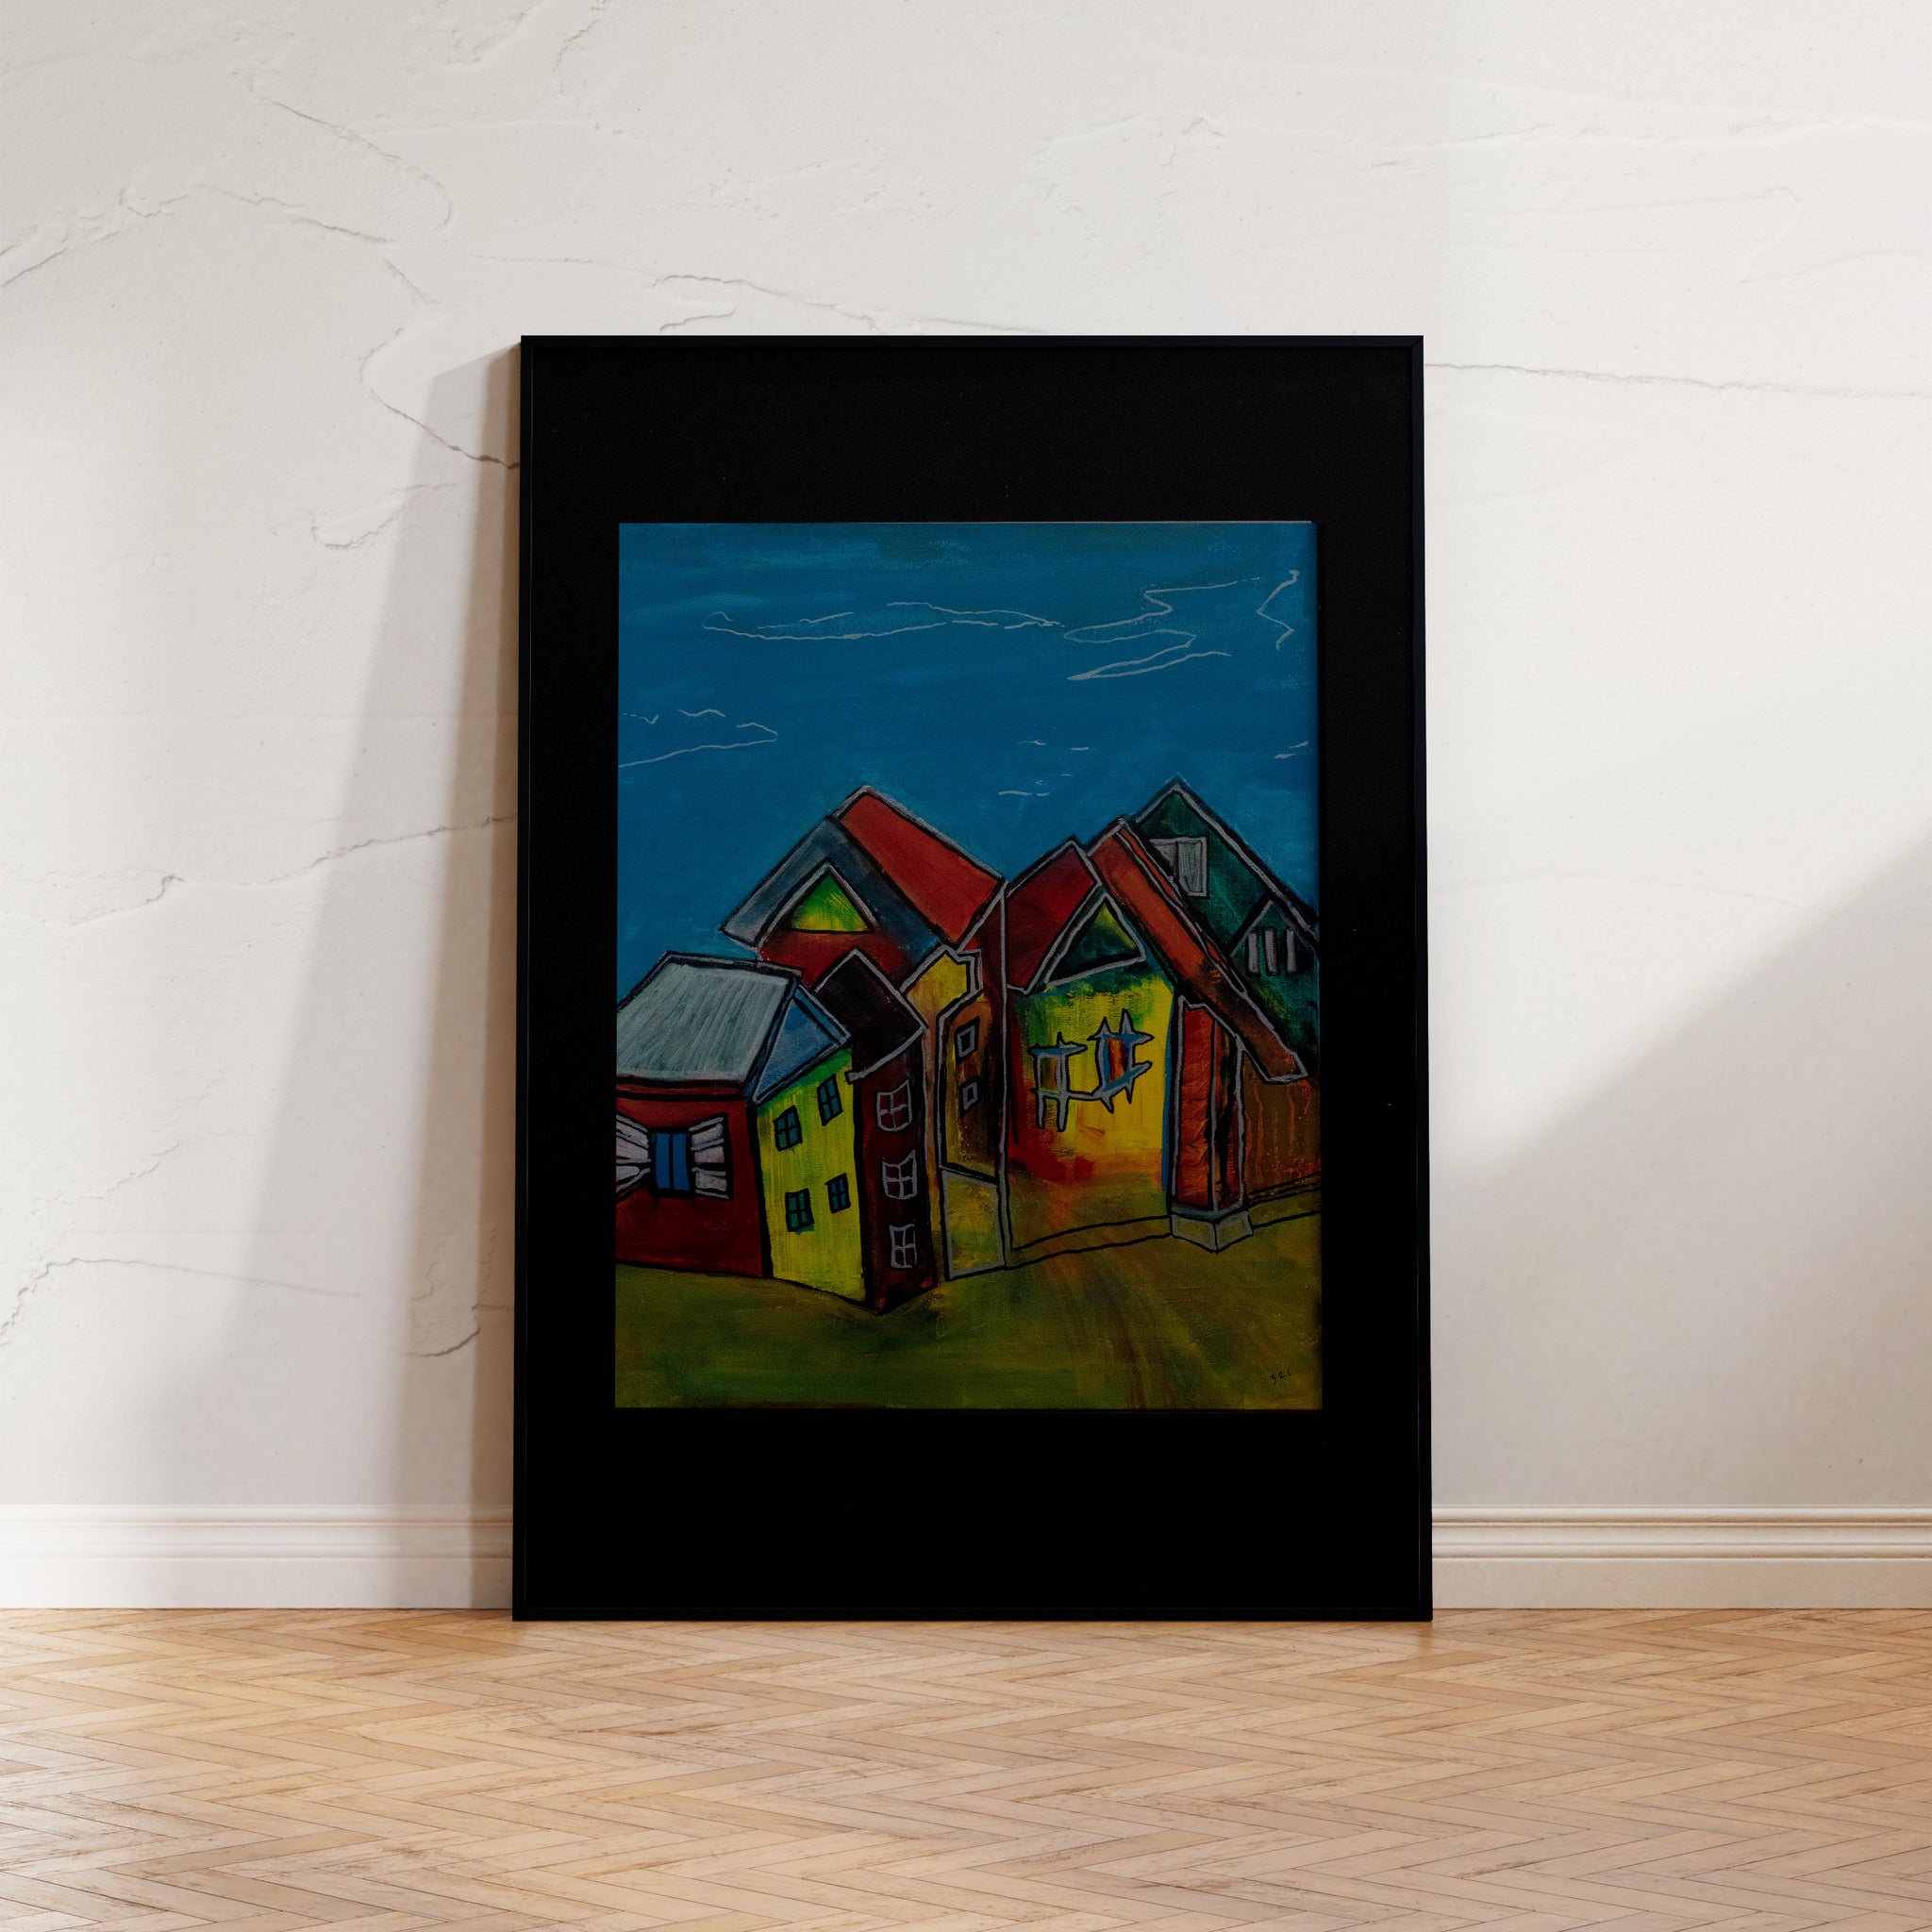 "Urban Sanctuary" by Brian Findleton: A minimalist artwork of a colorful house amidst a bold cityscape, capturing the tranquility amidst urban chaos.